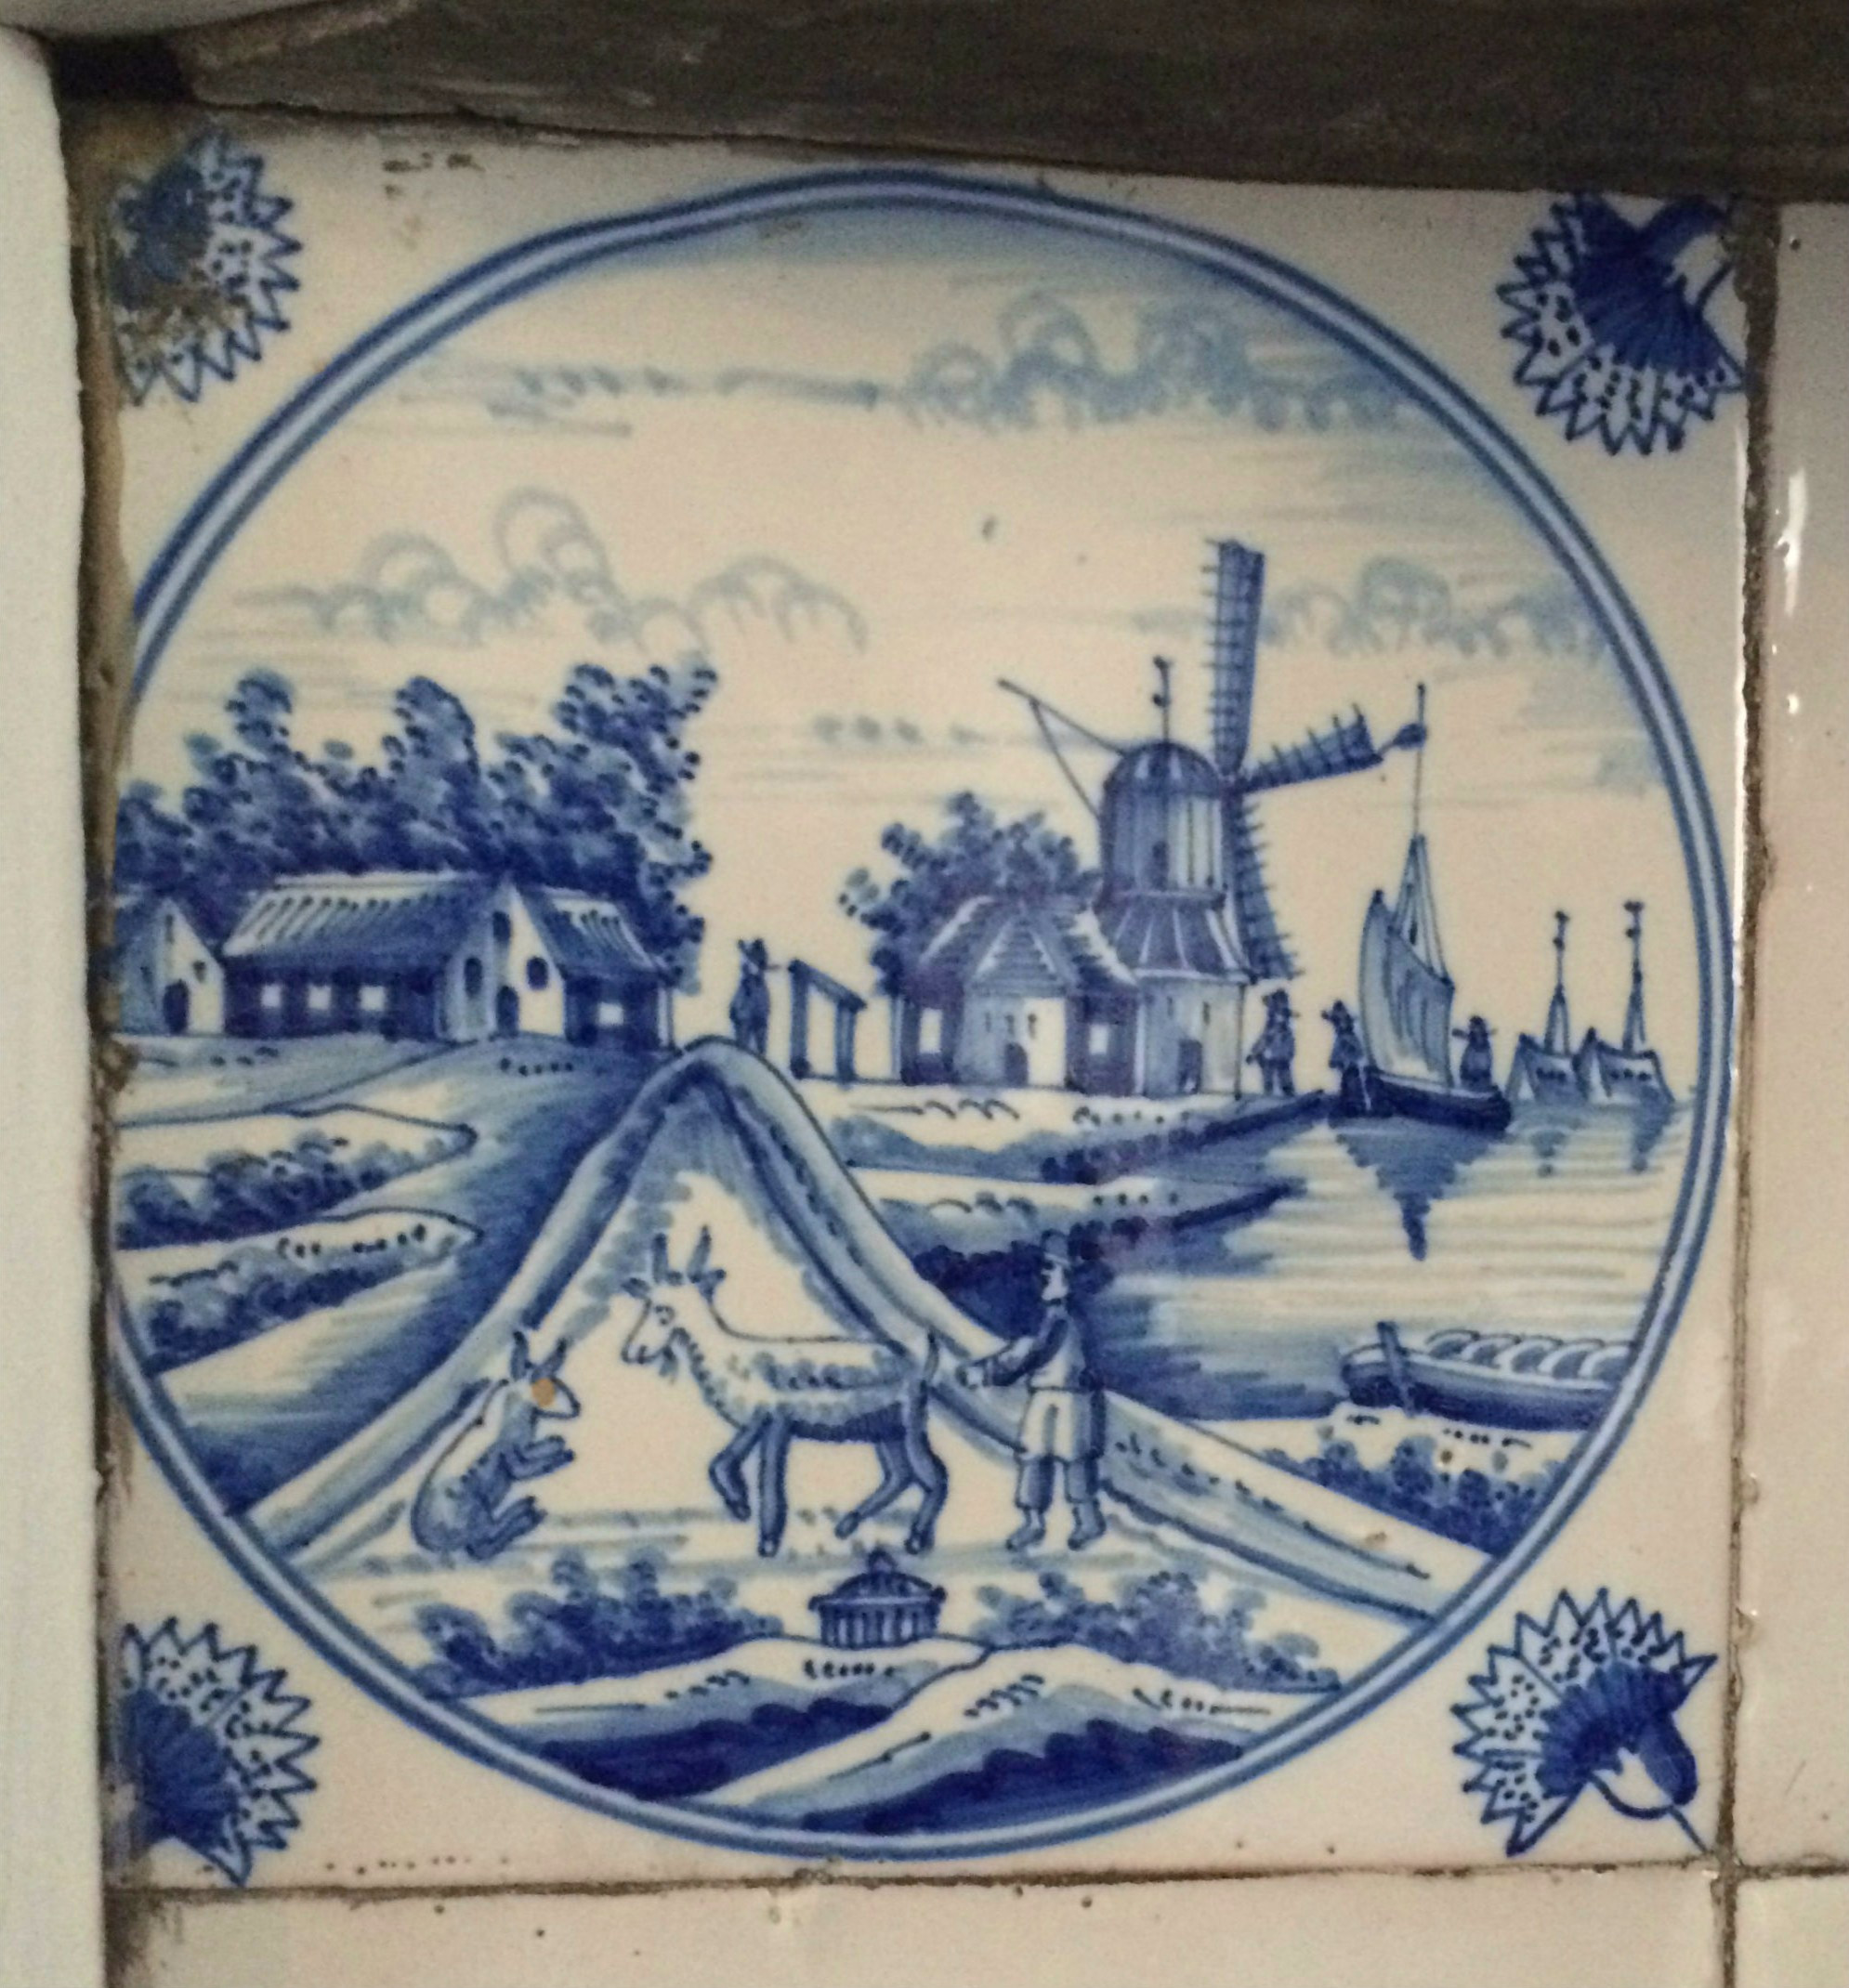 28 Spectacular Royal Delft Vase 2024 free download royal delft vase of delft porceln delft porceln click on the image to view bigger intended for royal in order to restore the fame of delft pottery the crown above the inscription on the bott